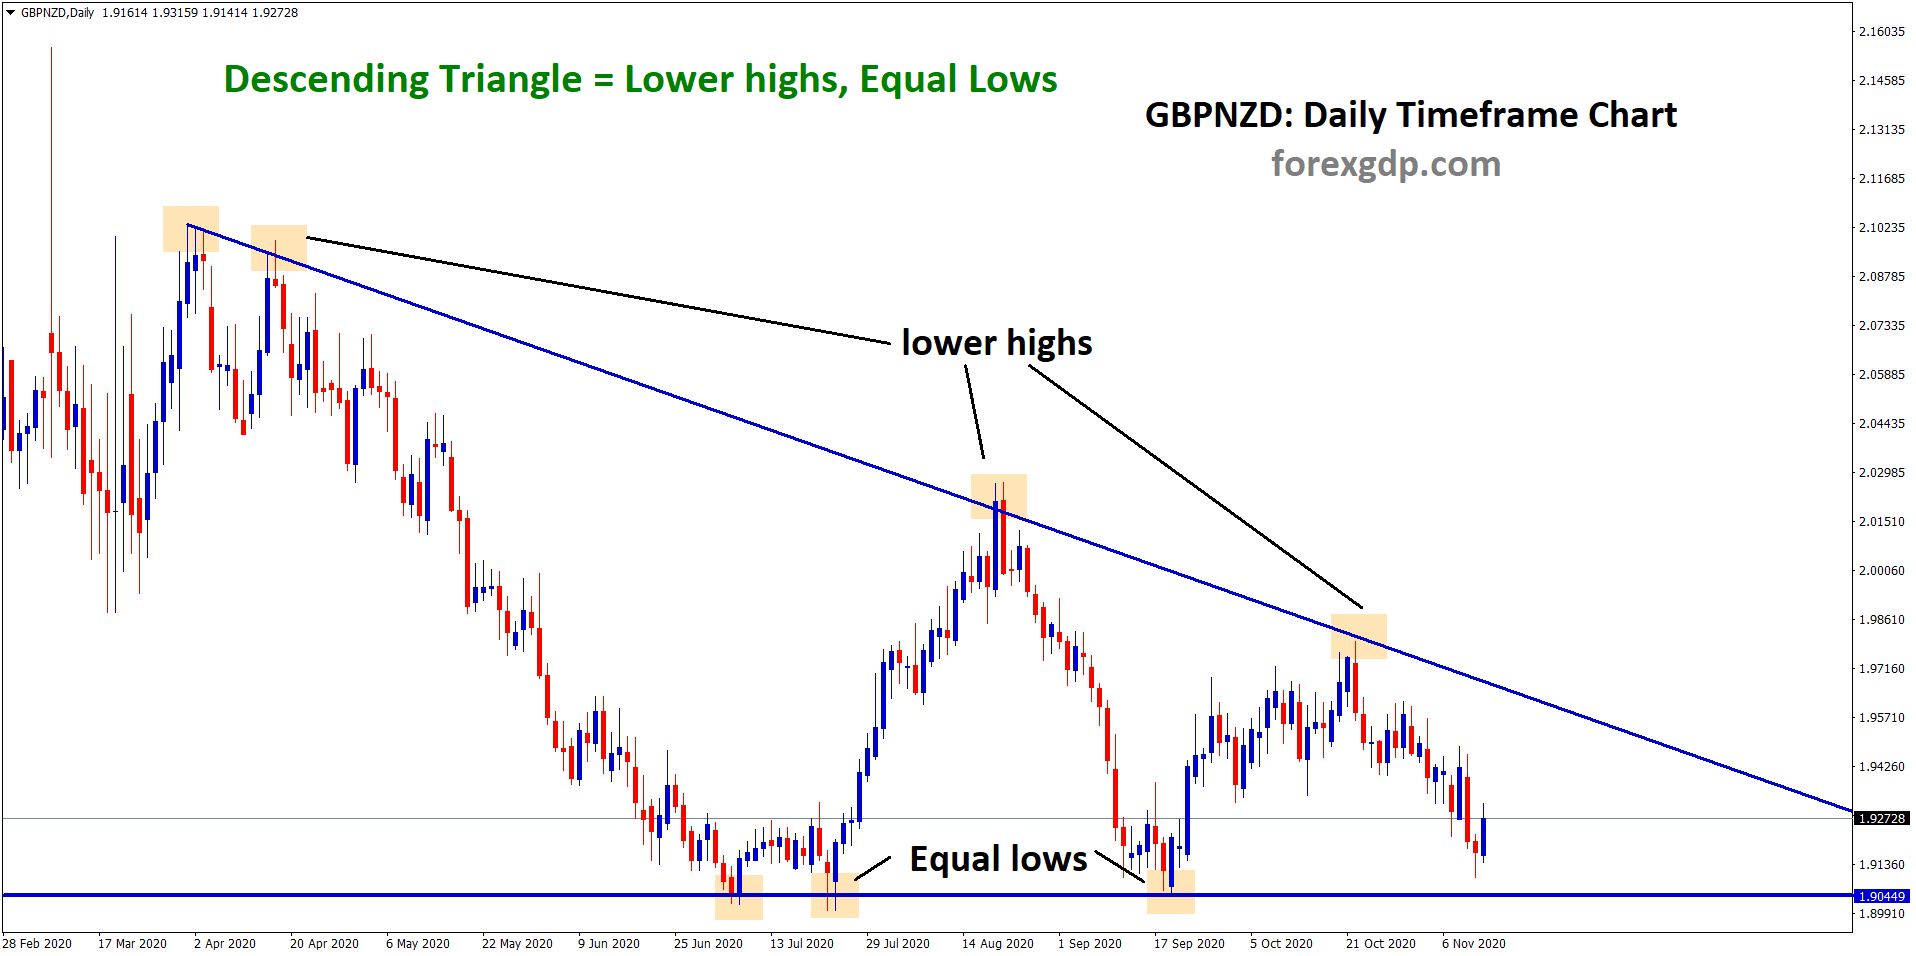 GBPNZDDaily descending triangle pattern